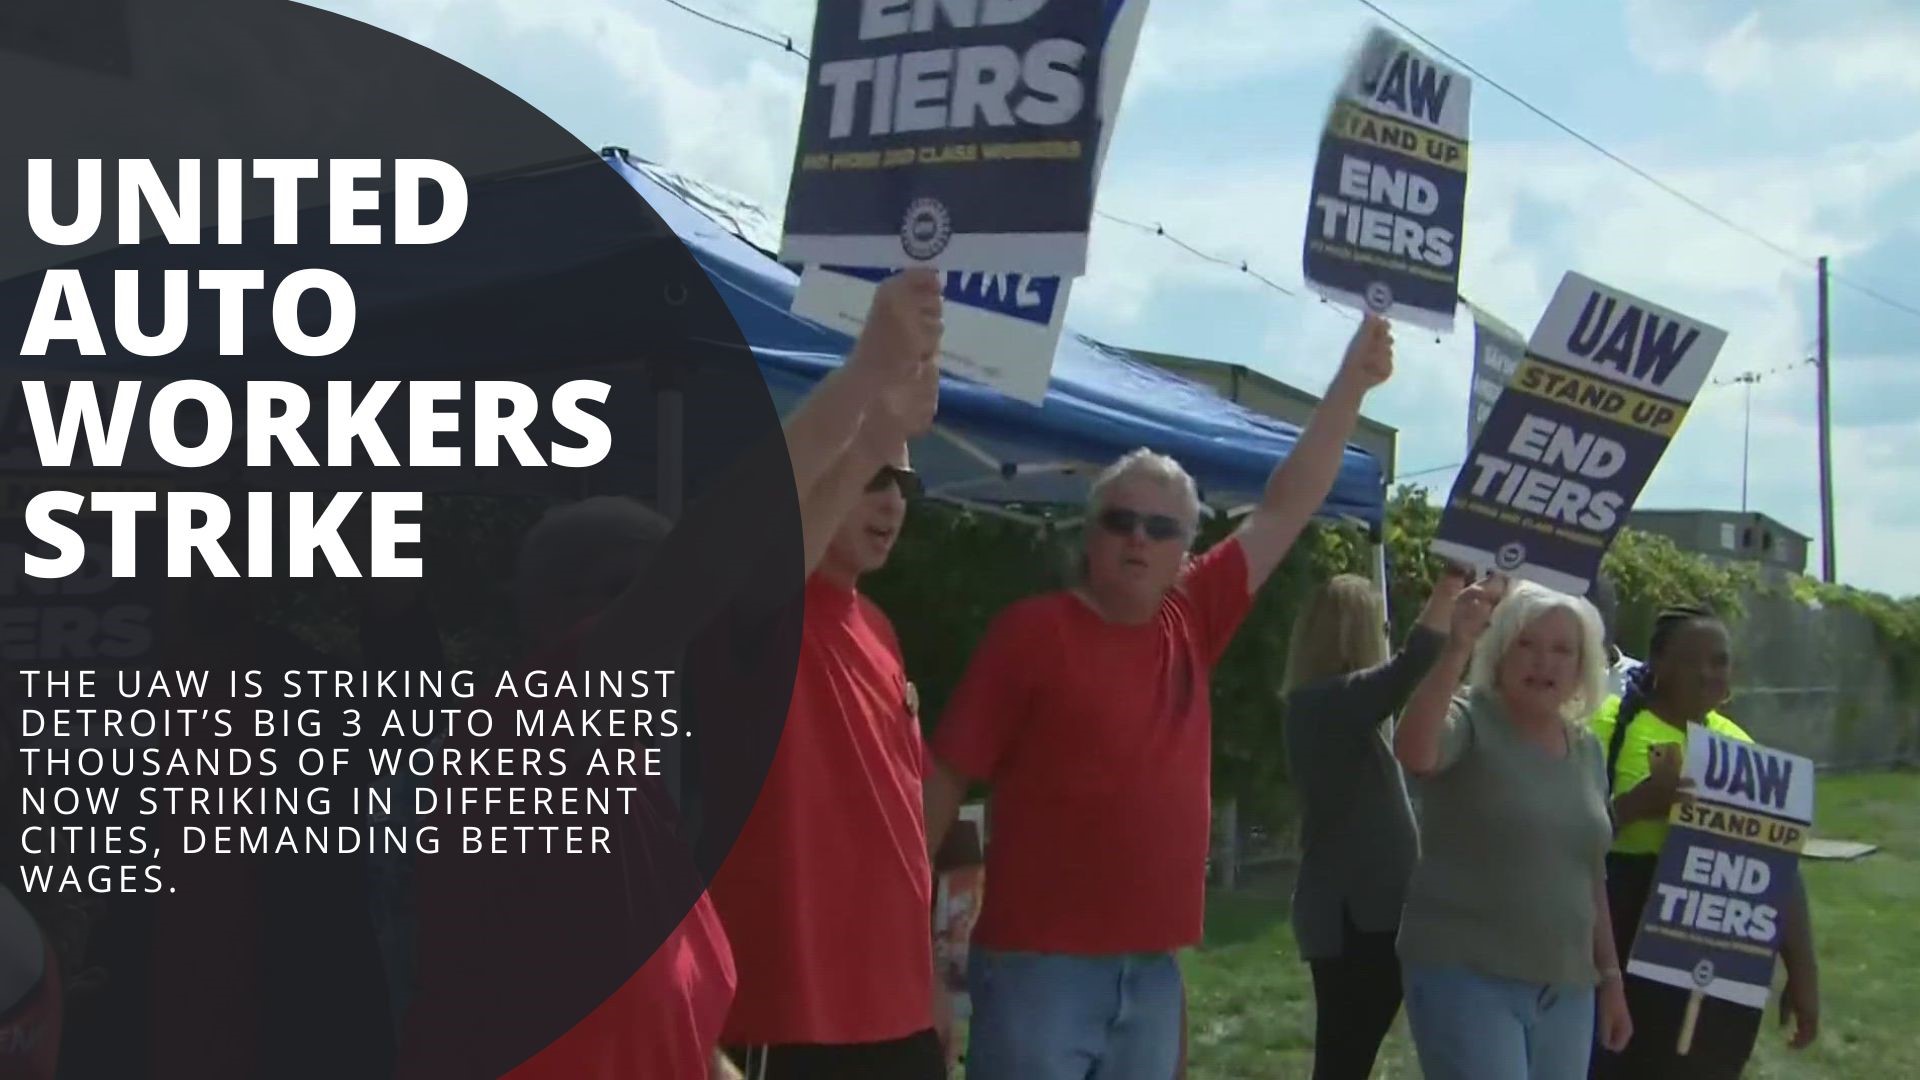 The UAW is striking against Detroit’s big 3 auto makers. How this impacts the auto industry, cities and workers at different plants.